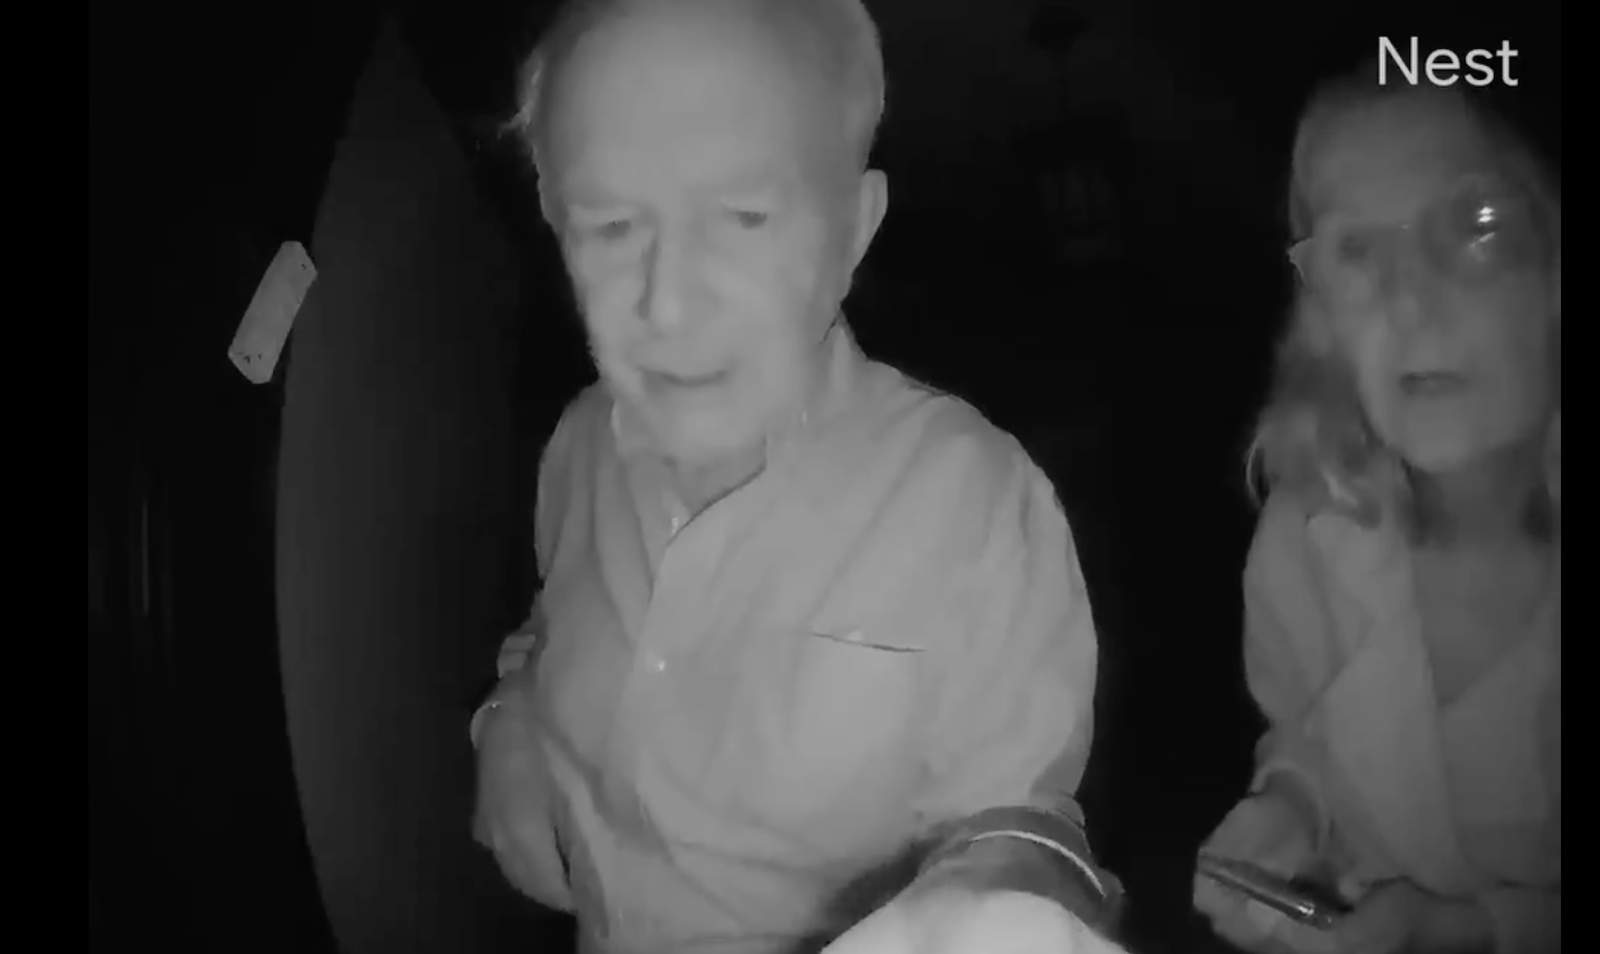 Home security camera catches moment Nobel Prize winner finds out he won